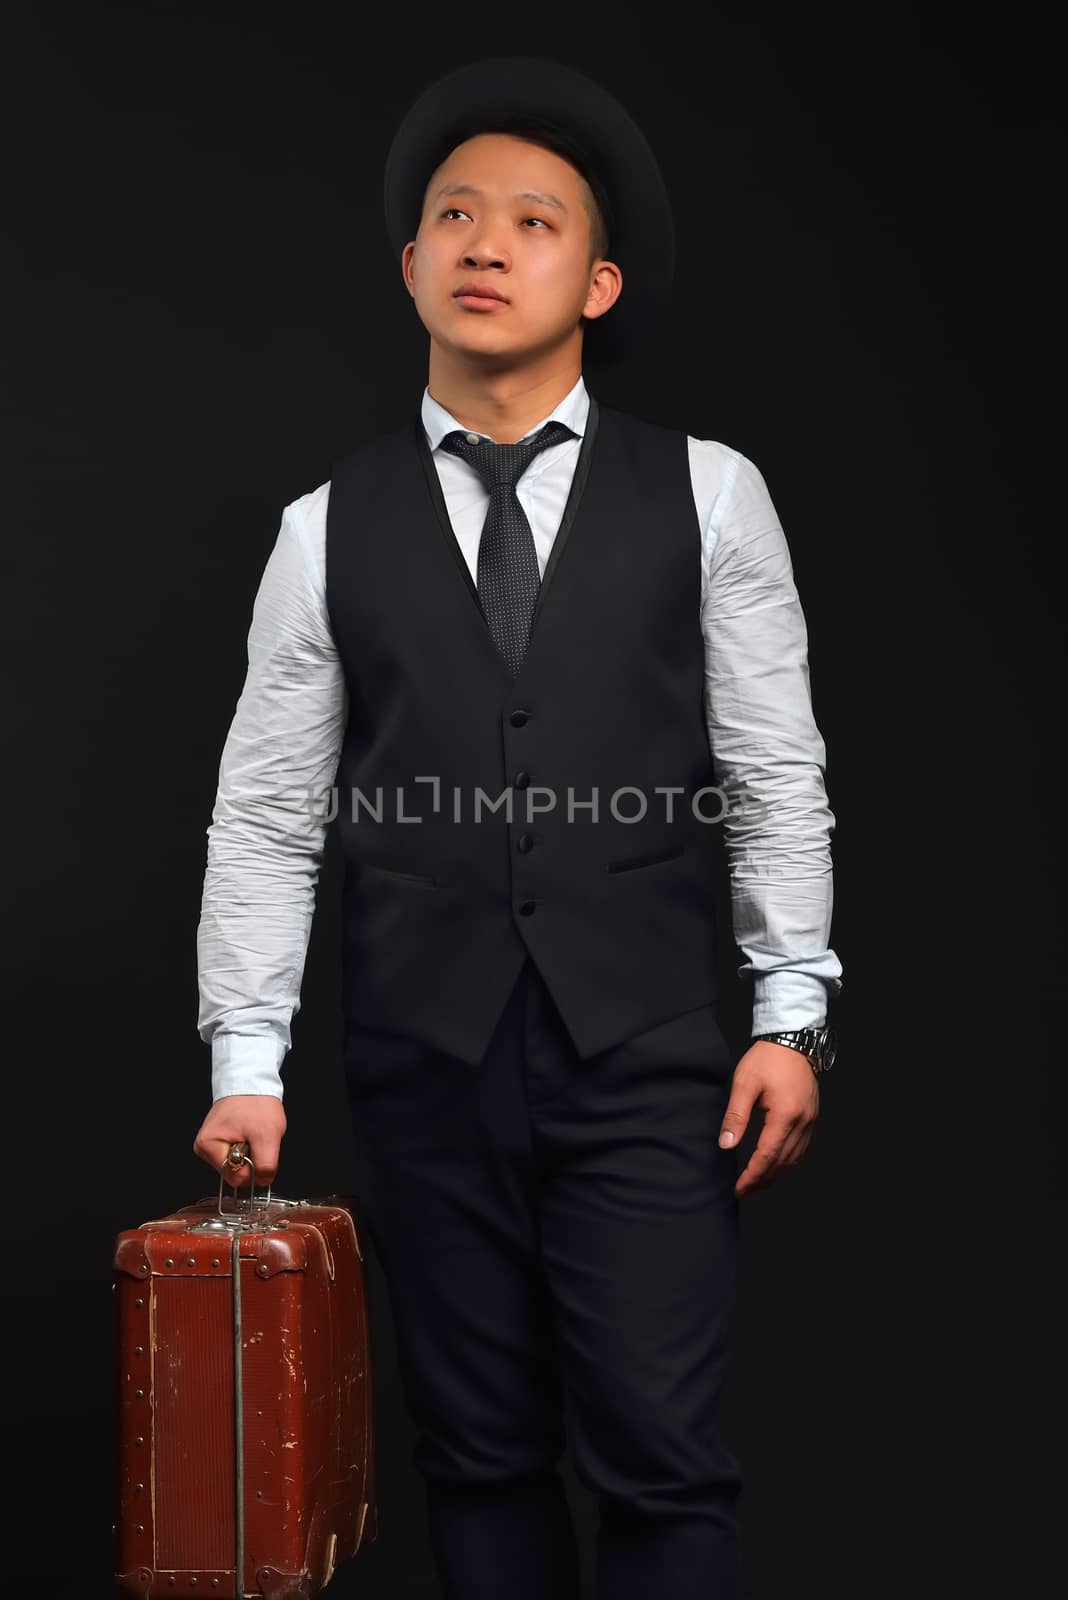 Asian man in a hat and a suit with a brown suitcase looks up, thoughtful, photo in full swing